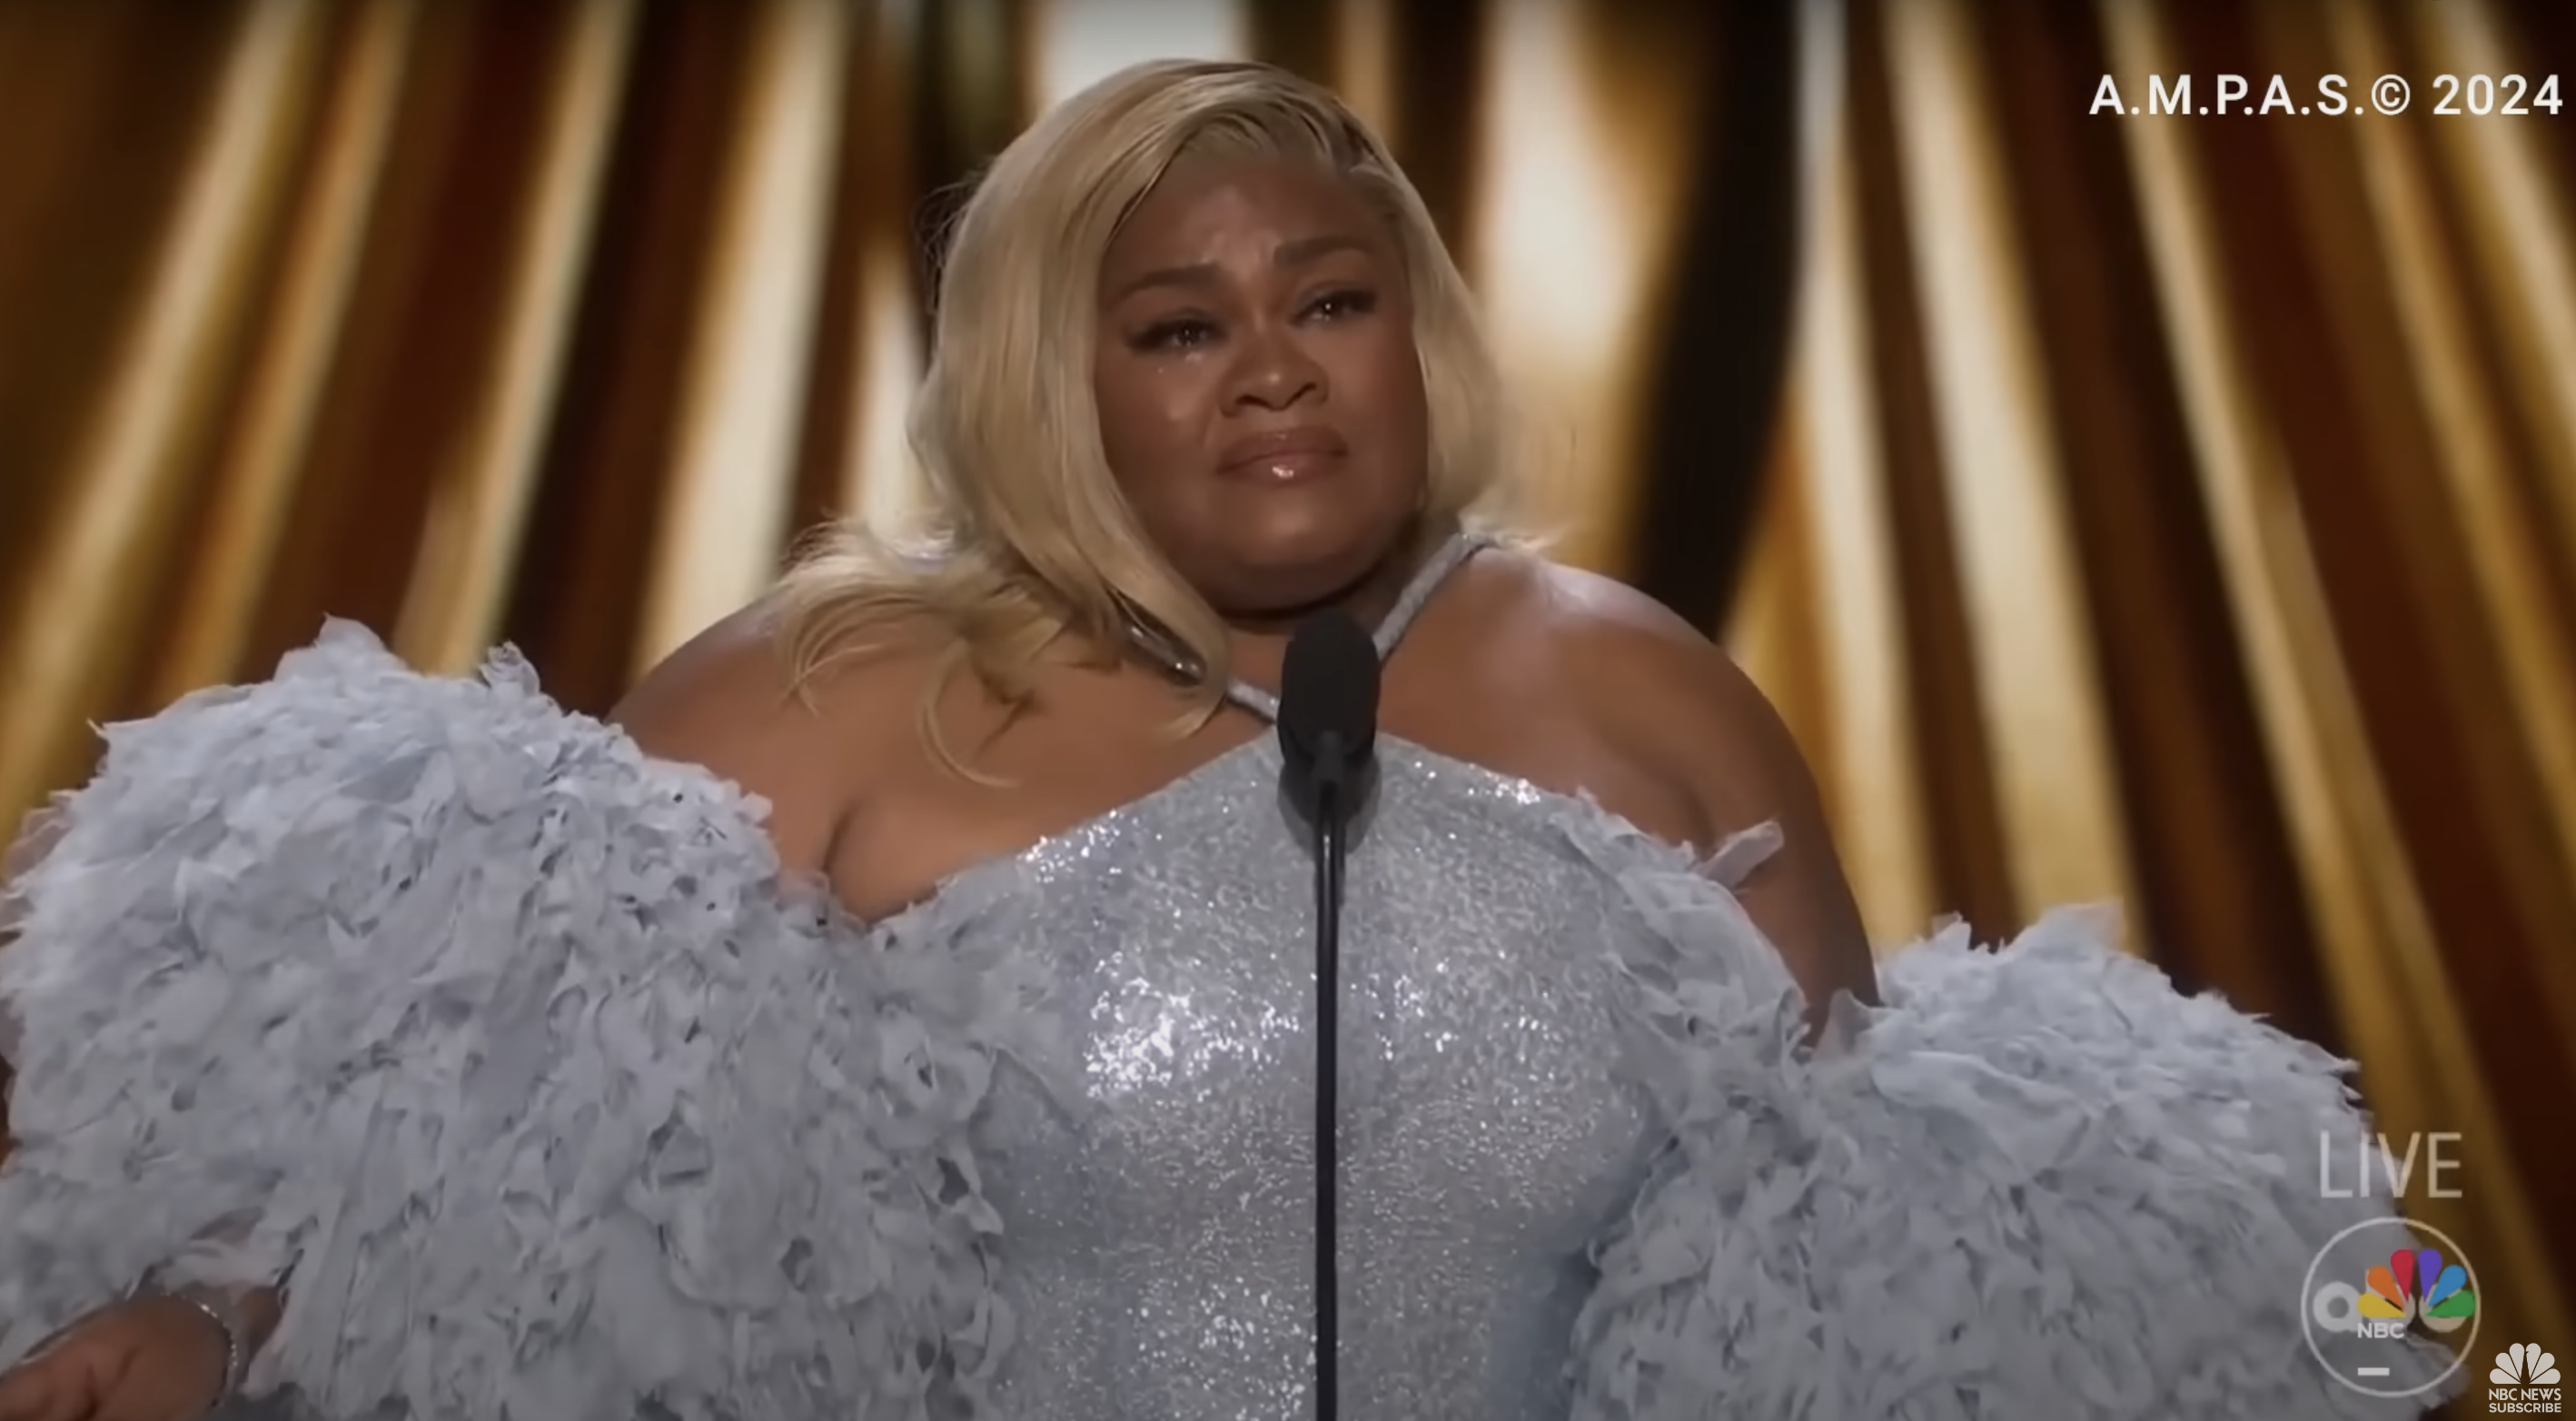 Da'Vine Joy Randolph breaks down onstage during Oscars 2024, as seen in a video posted on March 11, 2024 | Source: YouTube/NBCNews